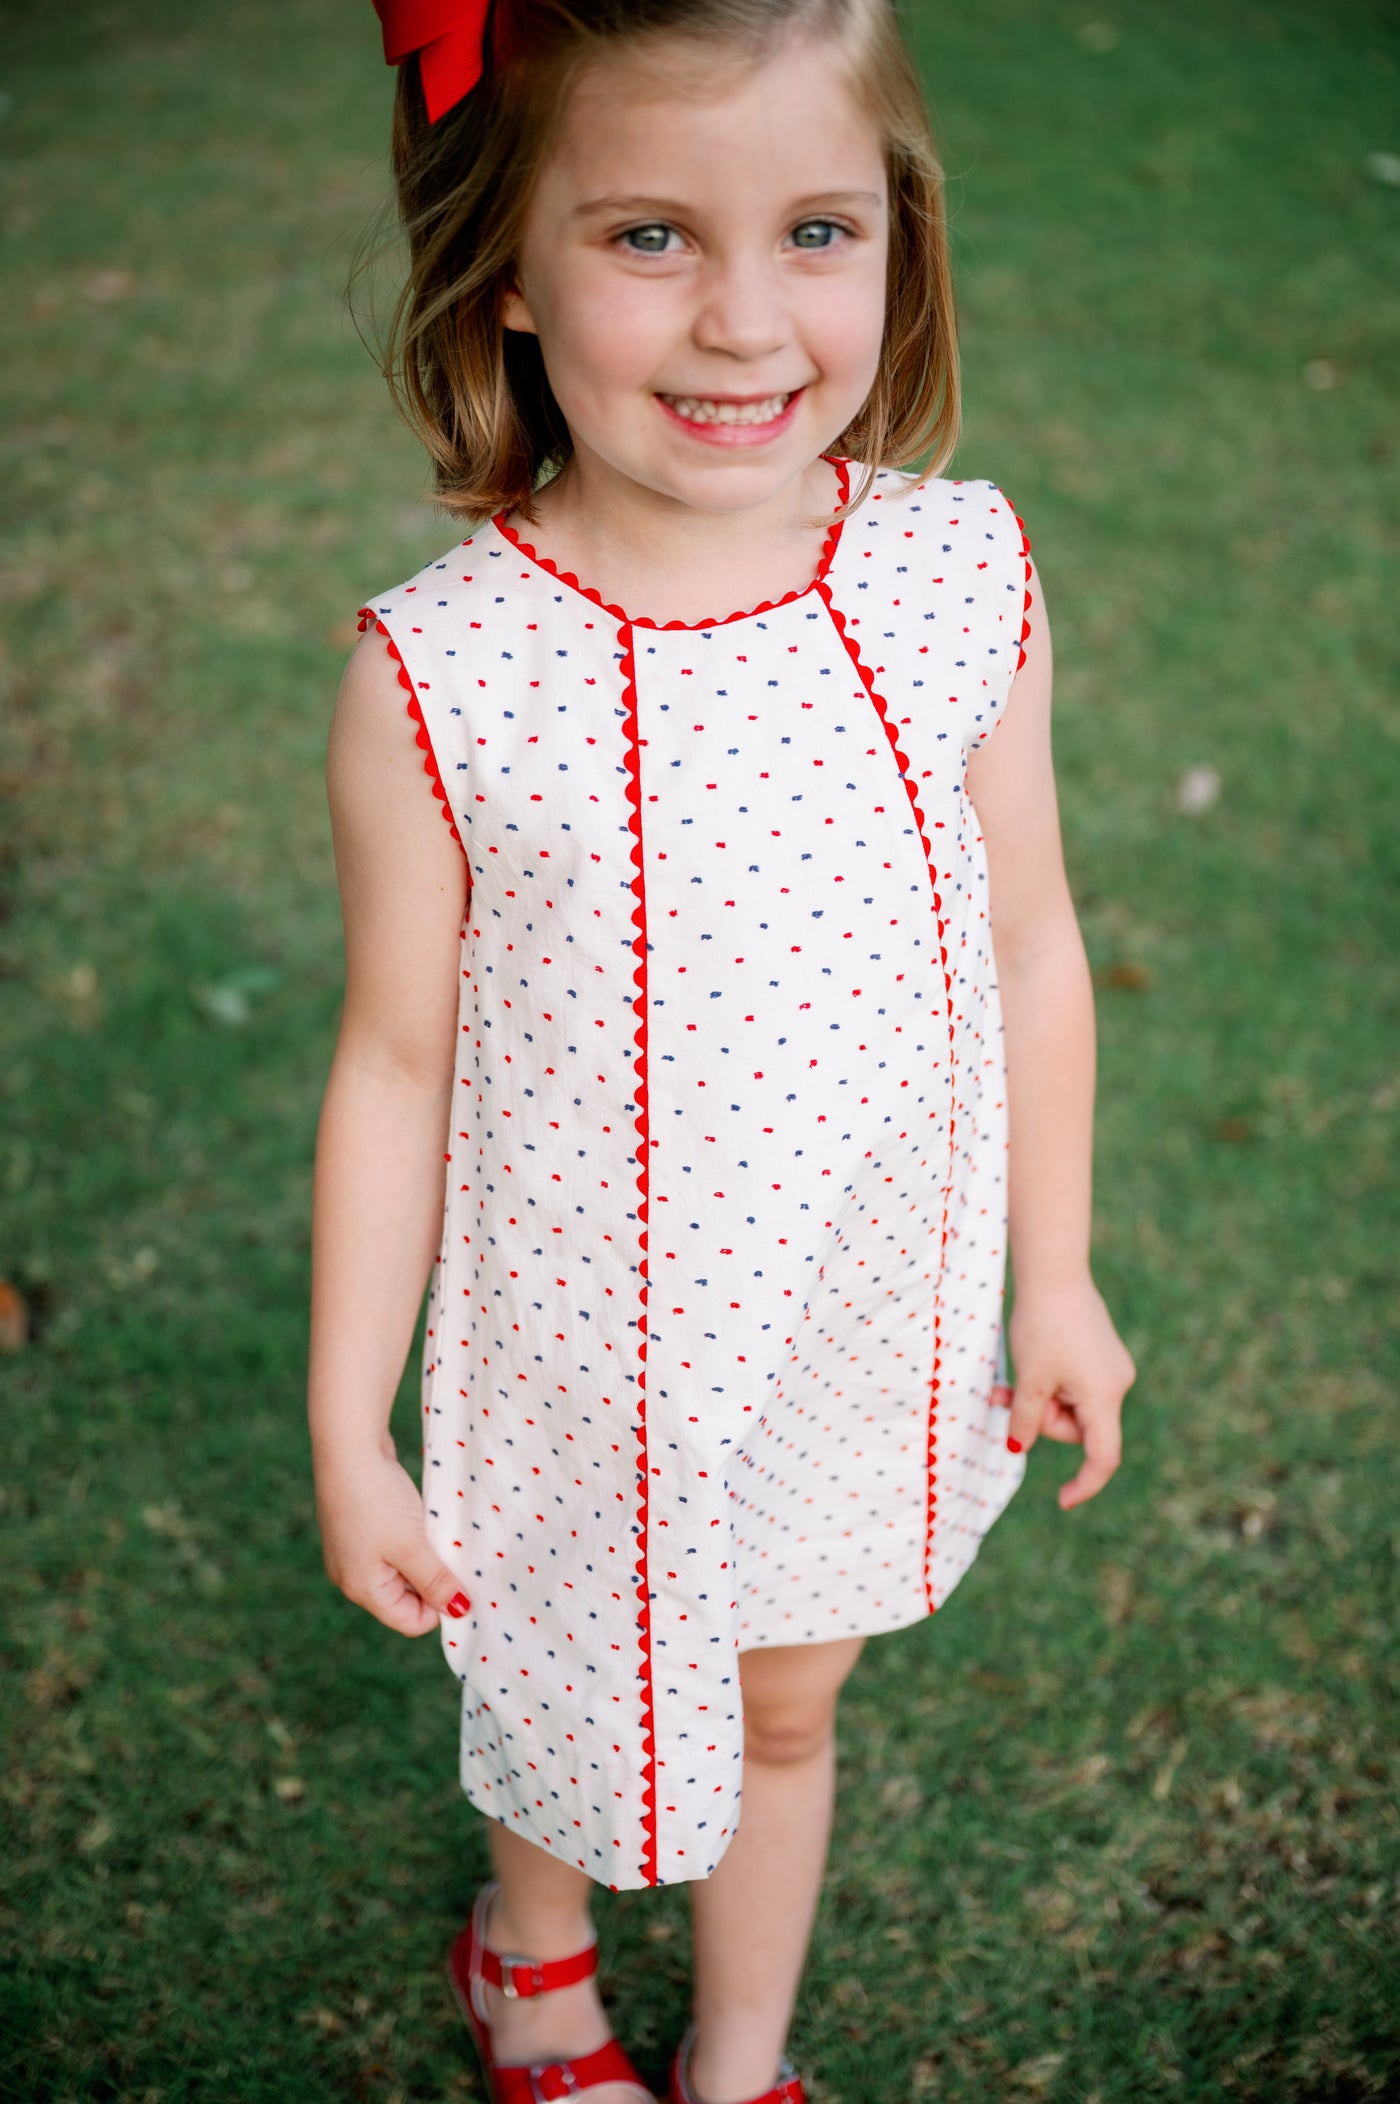 Amelia Aline Dress in Navy and Red Swiss Dot